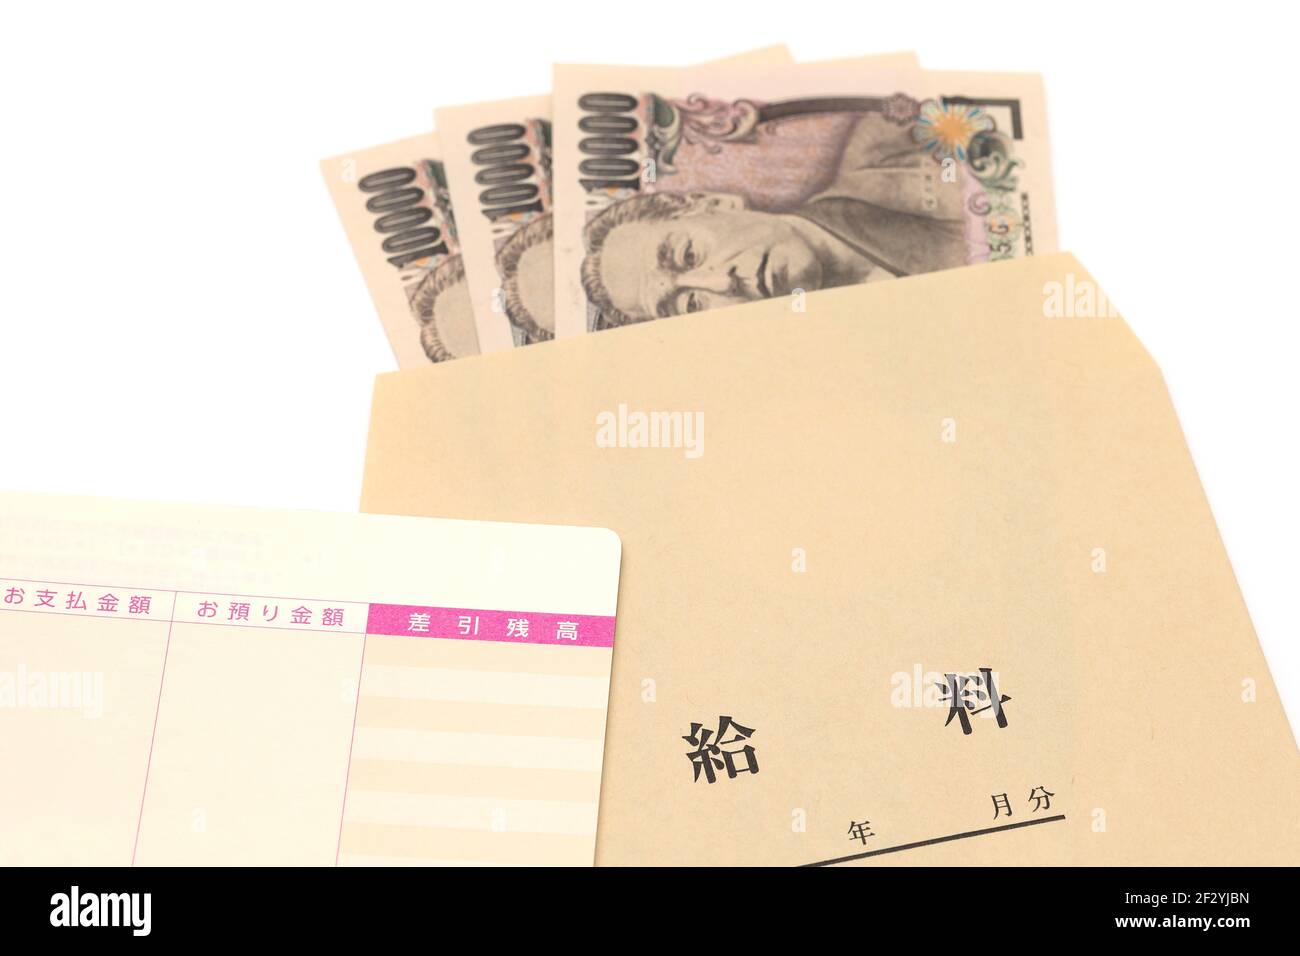 Japanese ten thousand yen in a salary bag on white background, Translation: year, month, day, payment, deposit, balance, salary. Stock Photo